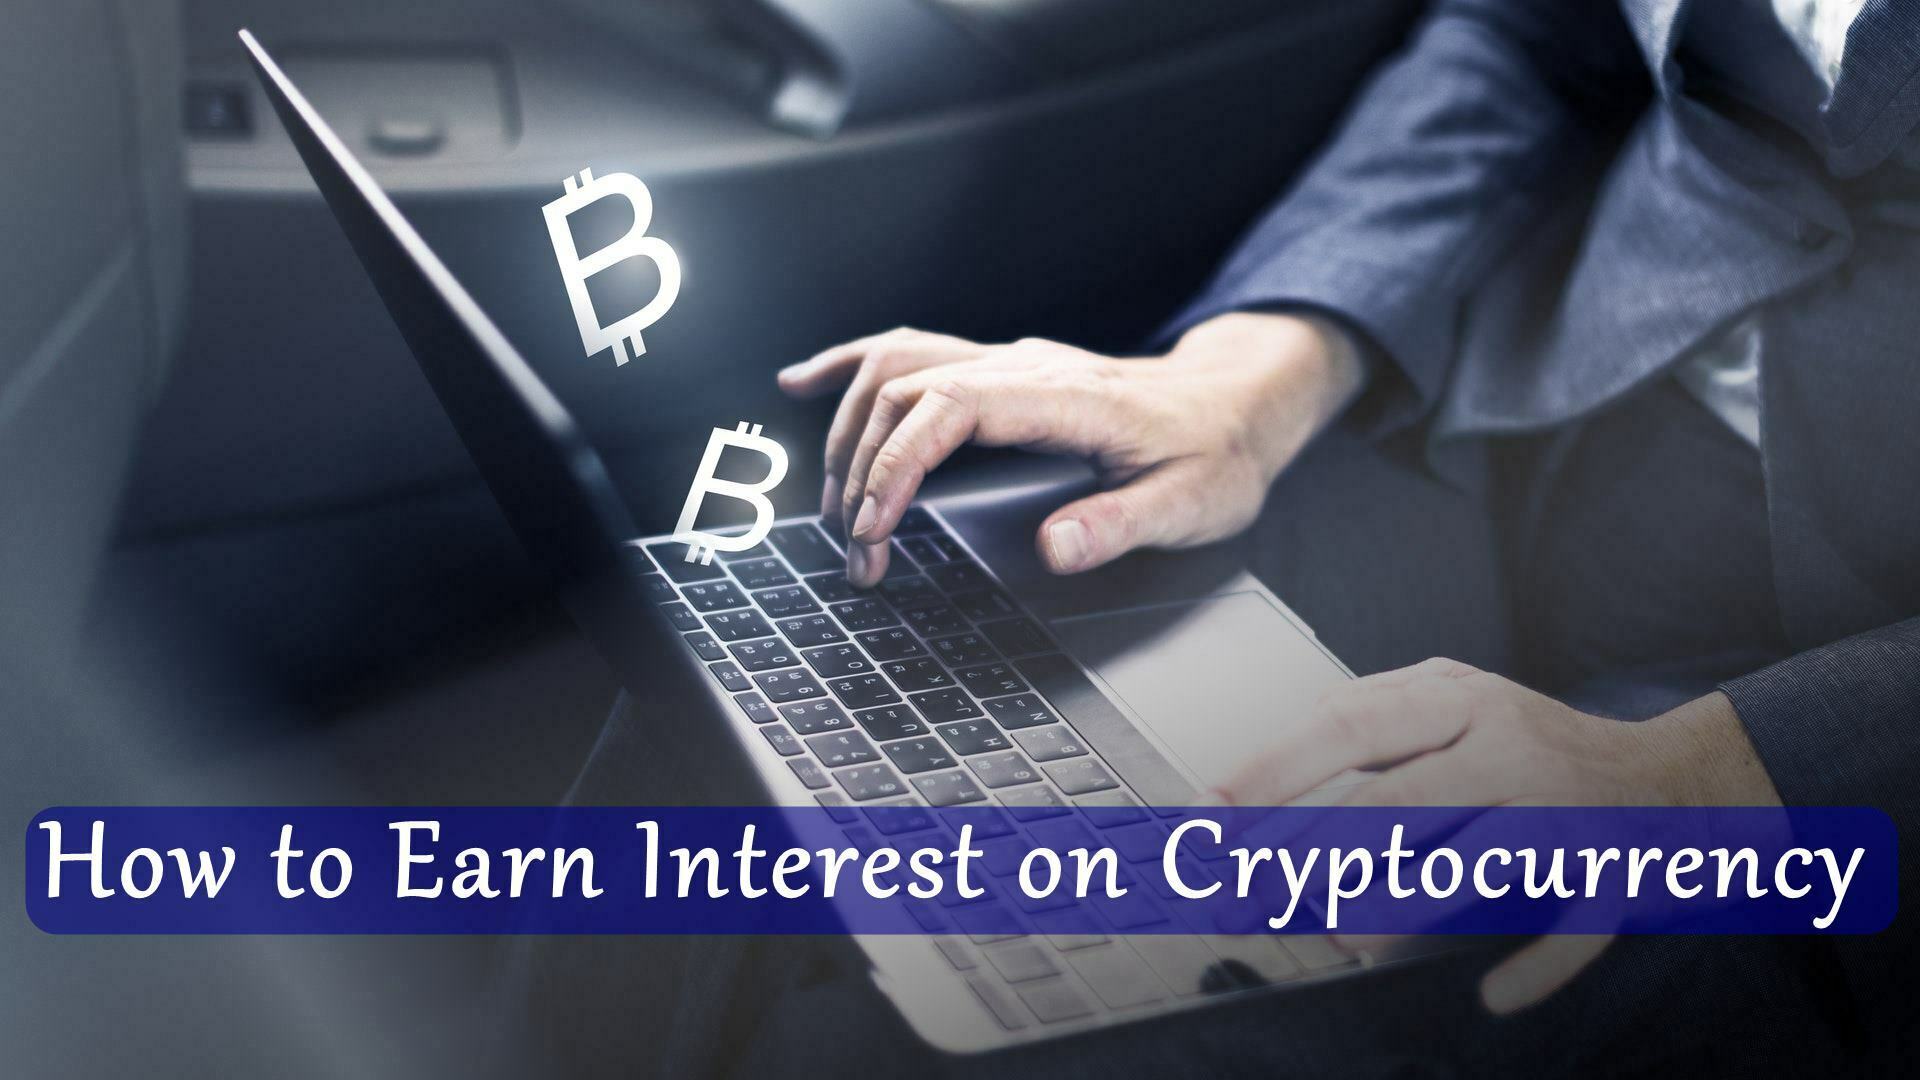 How to Earn Interest on Cryptocurrency